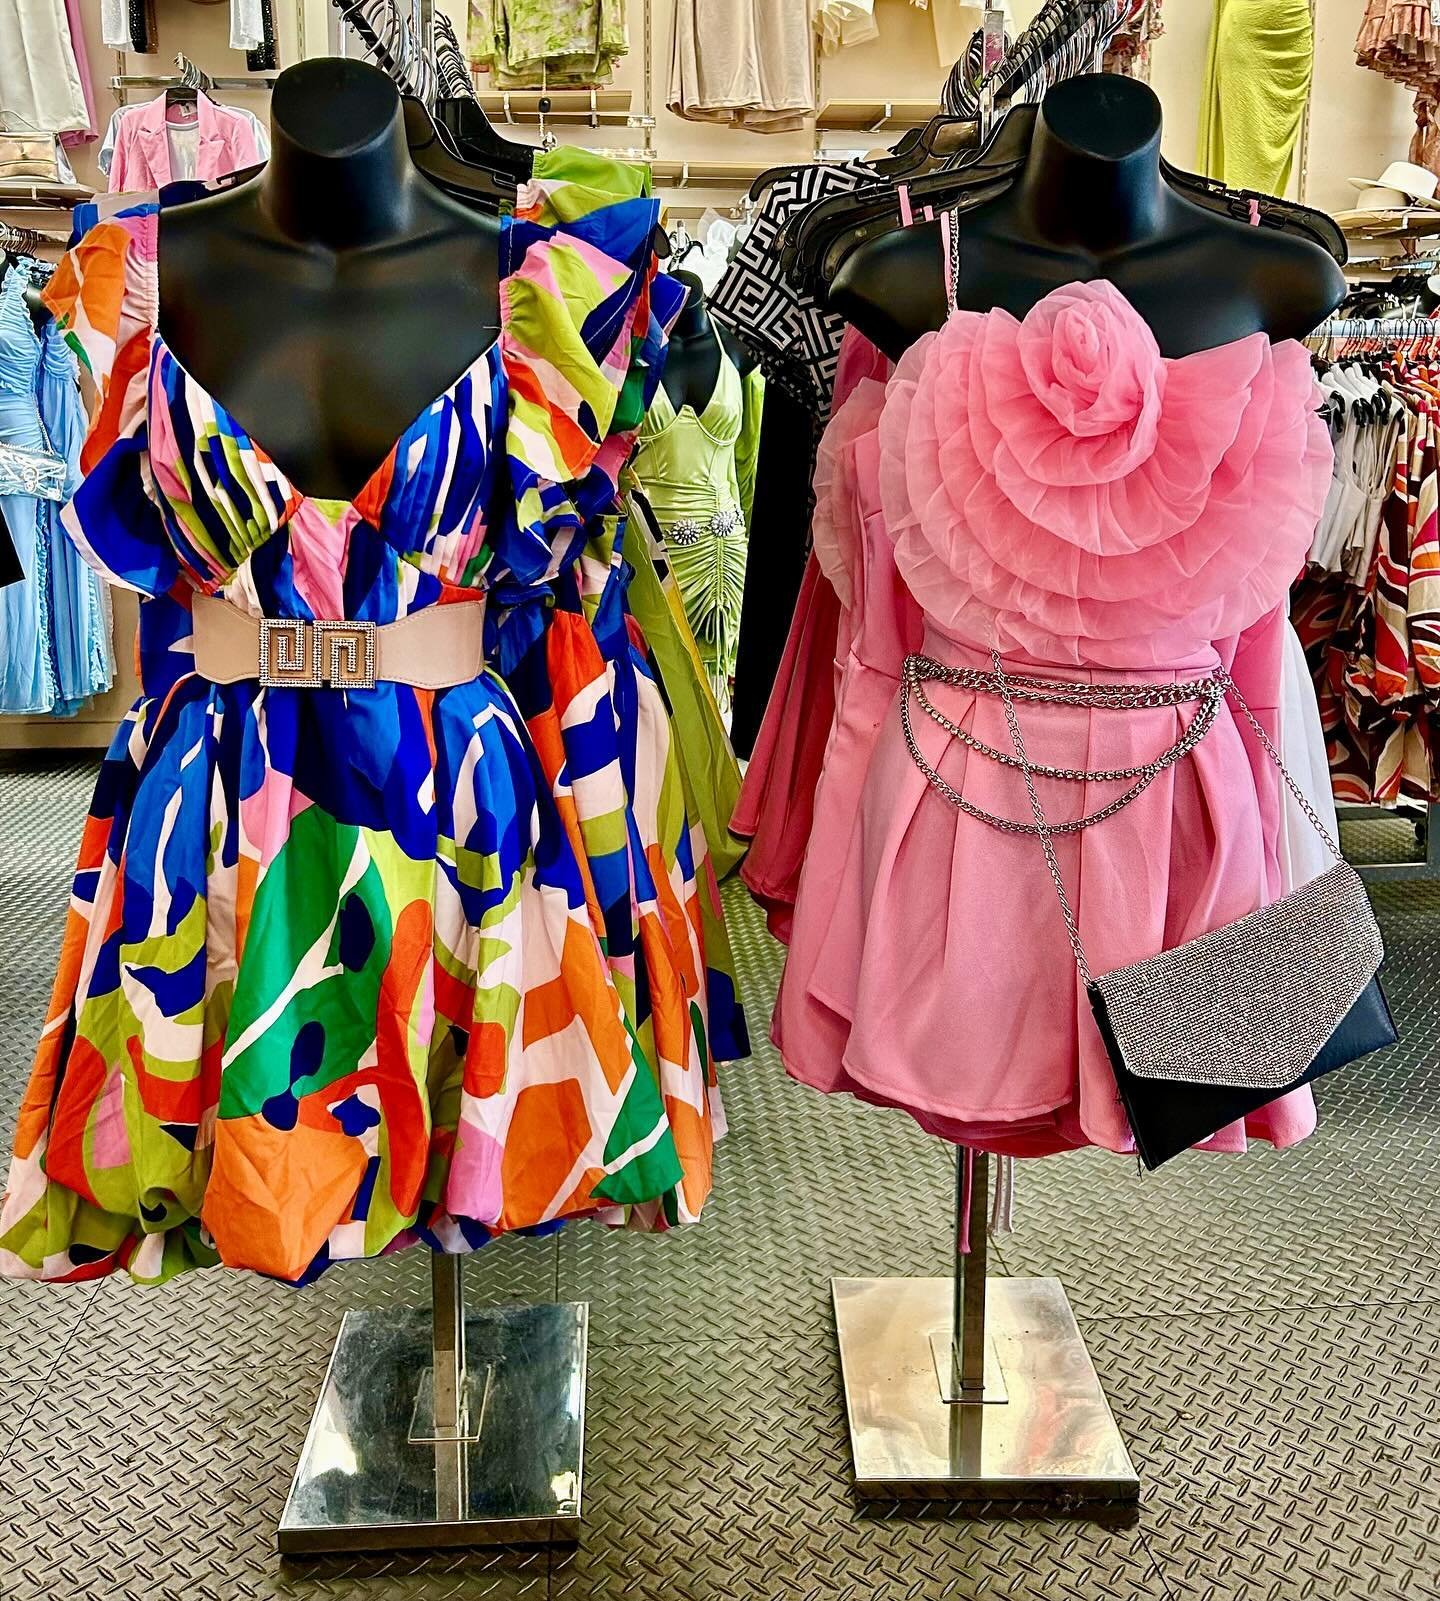 Add some color to your Mother&rsquo;s Day outfit with @madragstores ✨💐 #madragstores